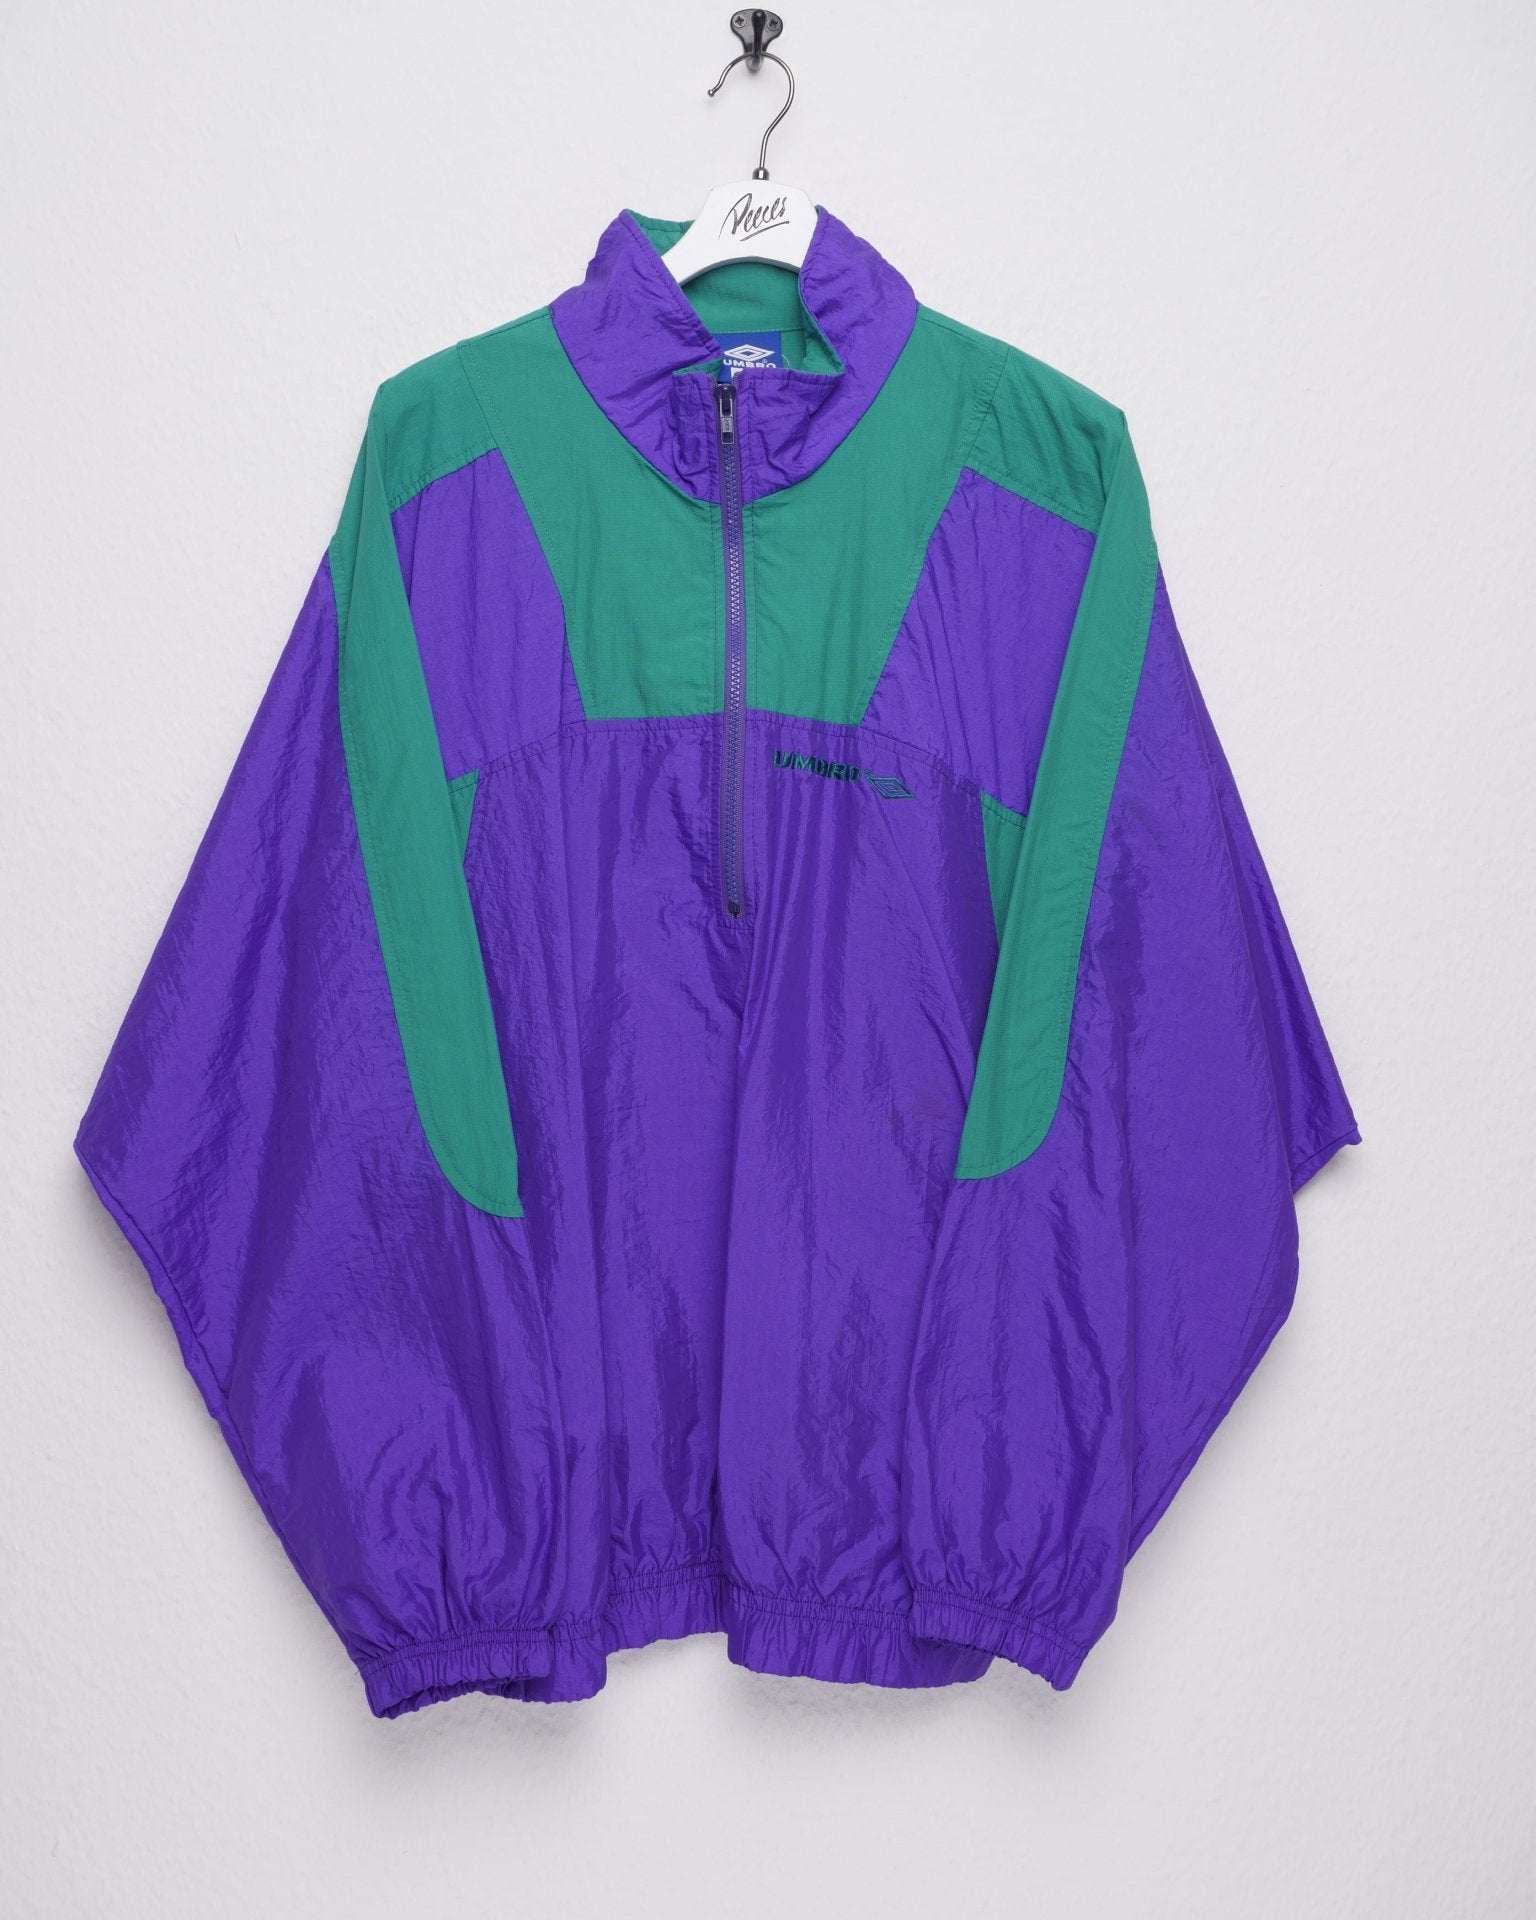 umbro embroidered Spellout two toned half zip Vintage Track Jacket - Peeces